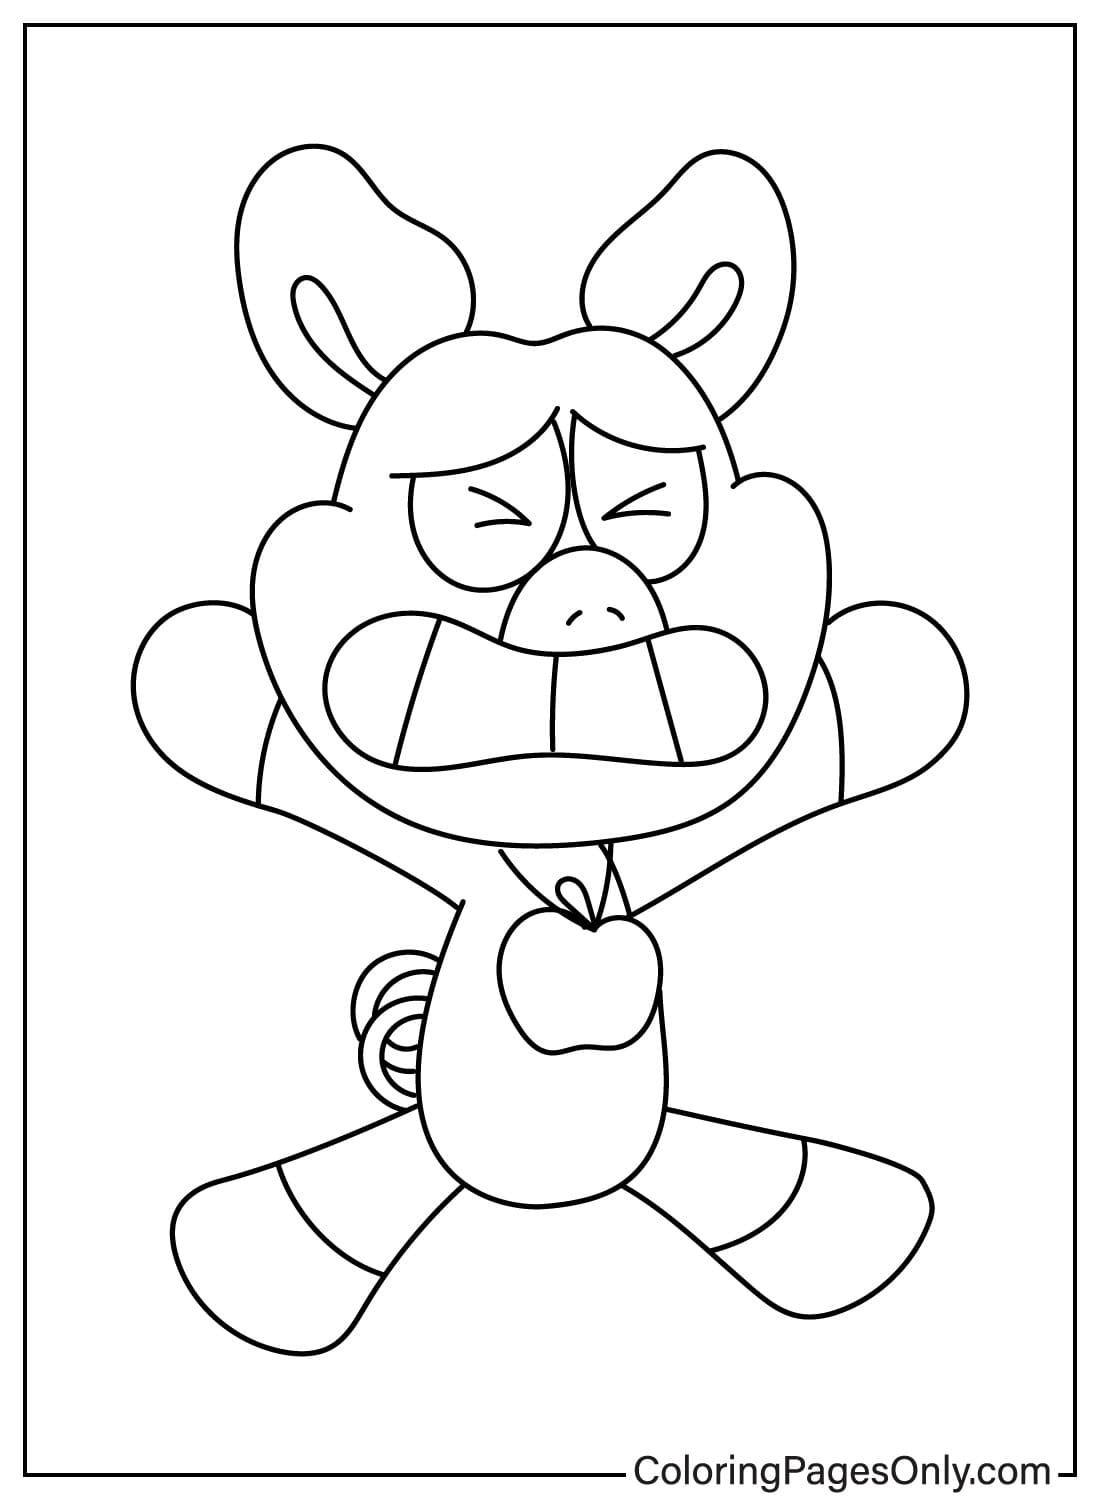 PickyPiggy Coloring Page from PickyPiggy